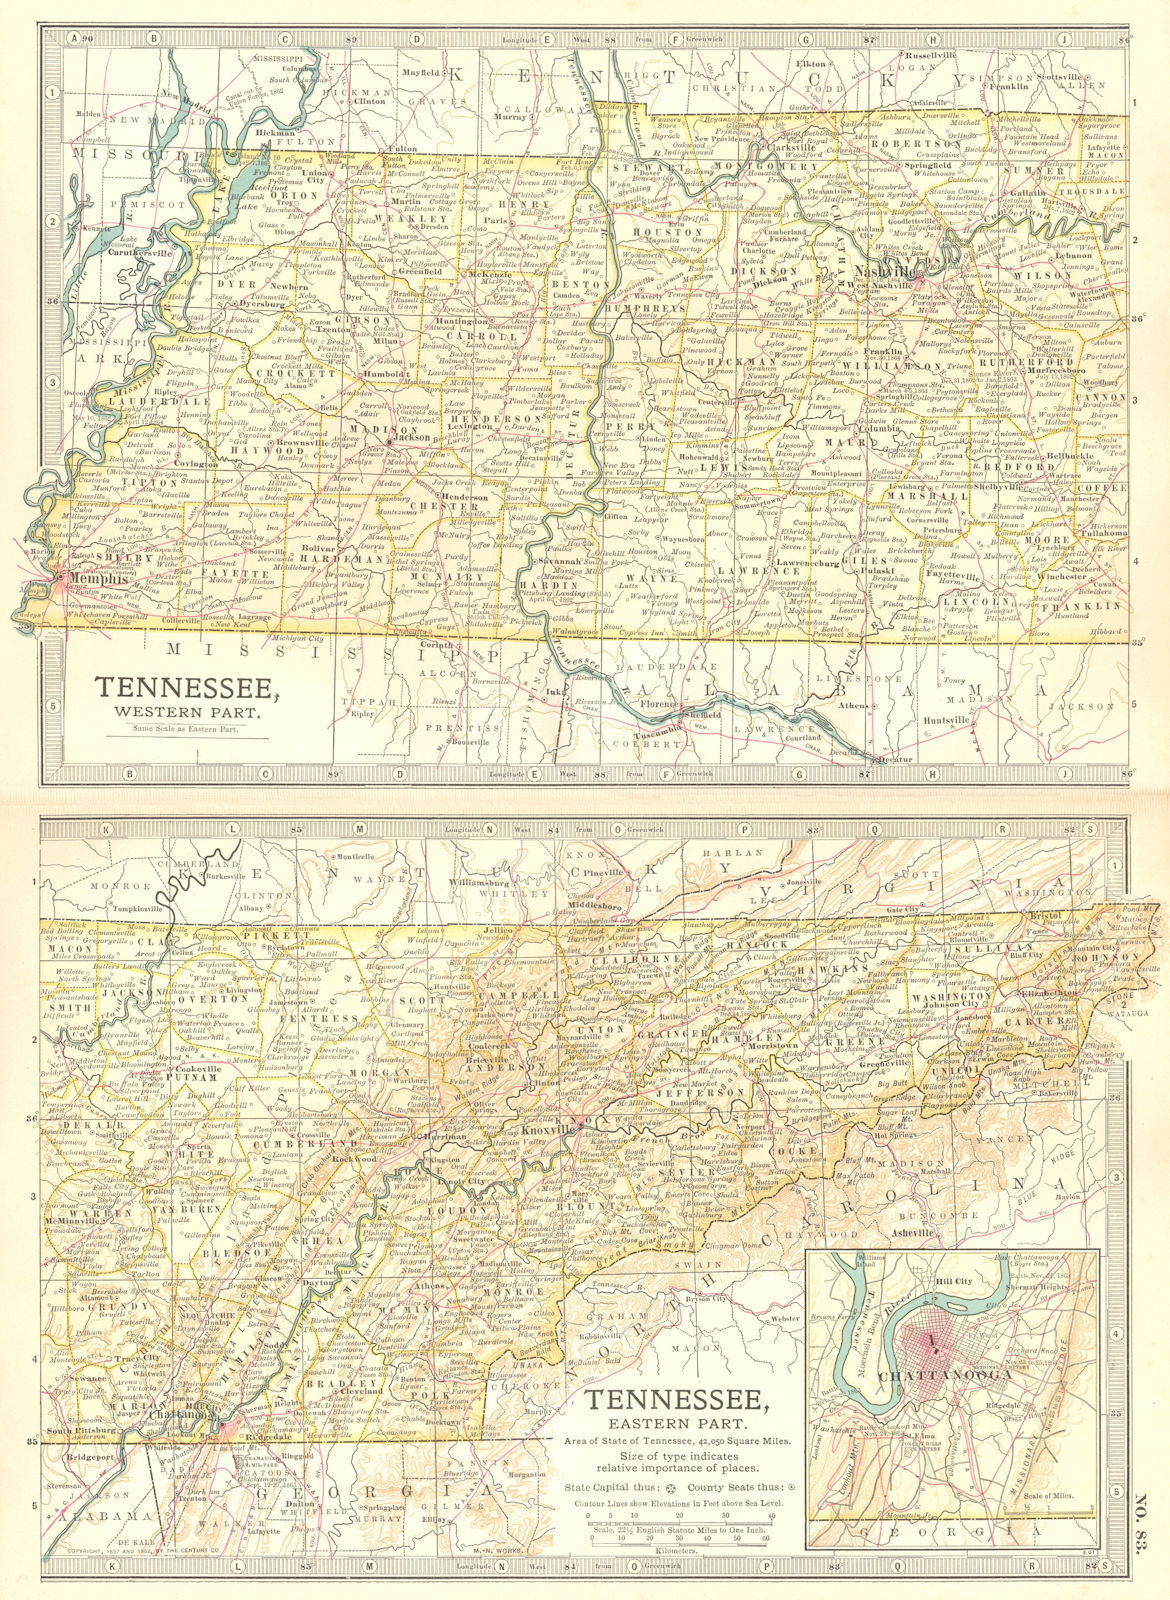 TENNESSEE. State map. Shows civil war battlefields. Inset Chattanooga 1903